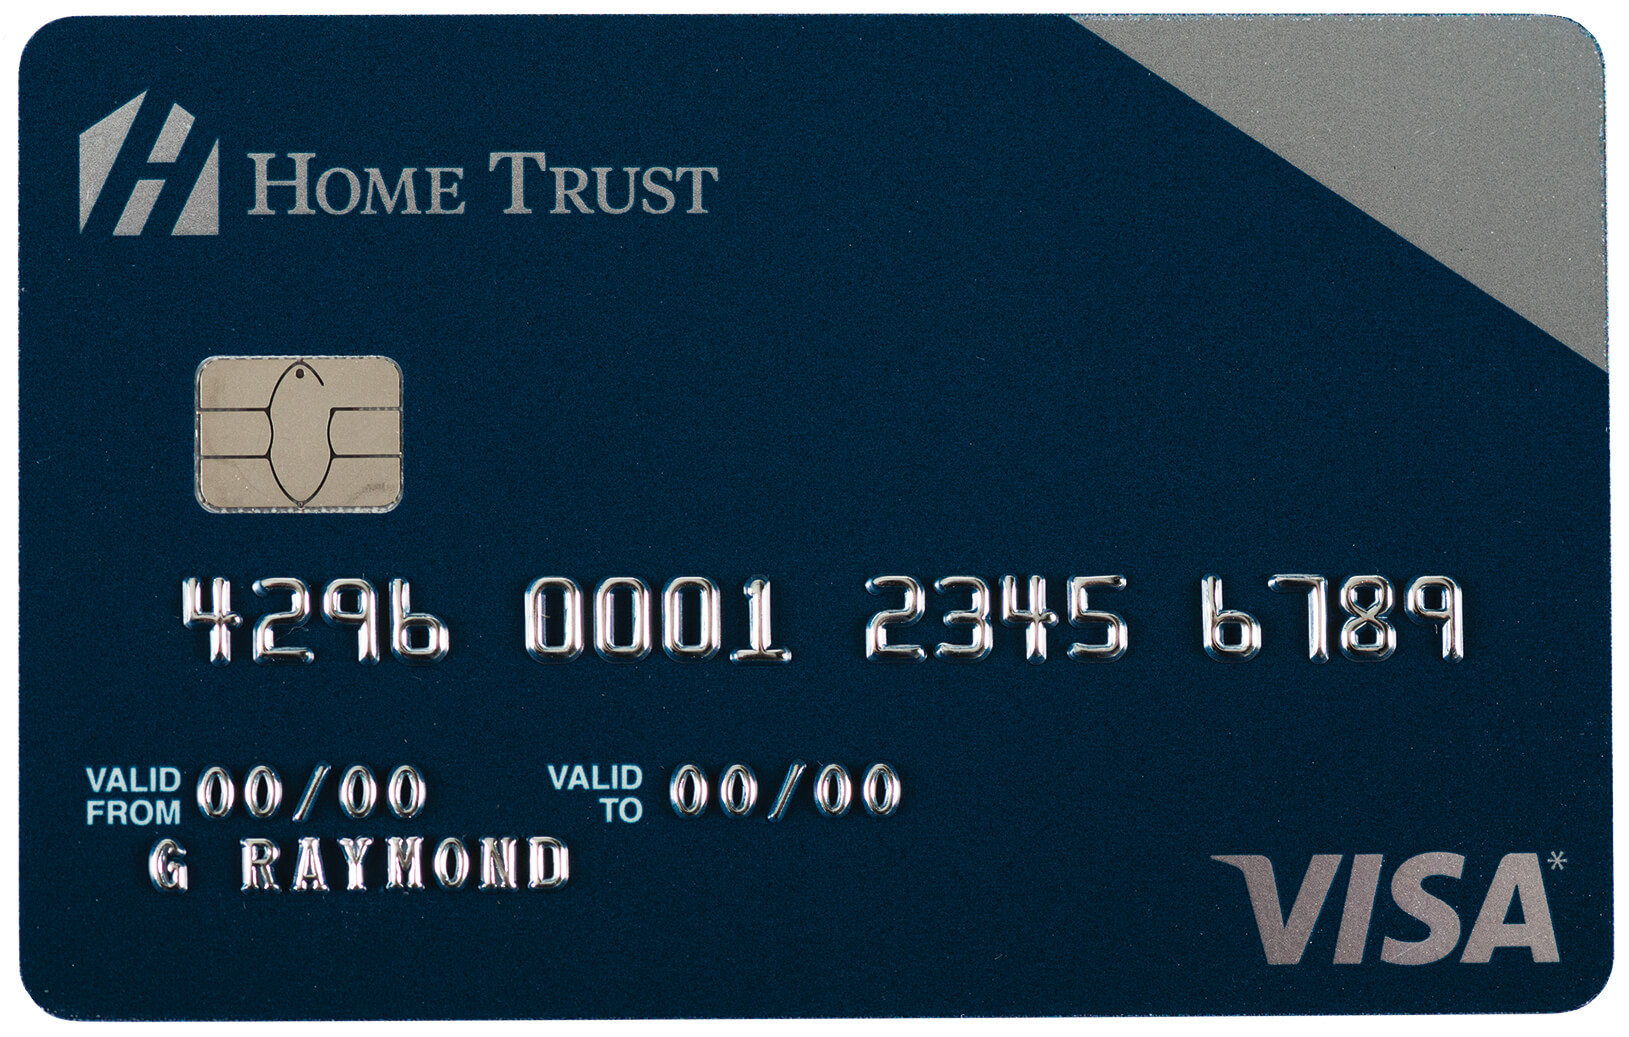 Canada’s best no foreign transaction fee credit cards 2021